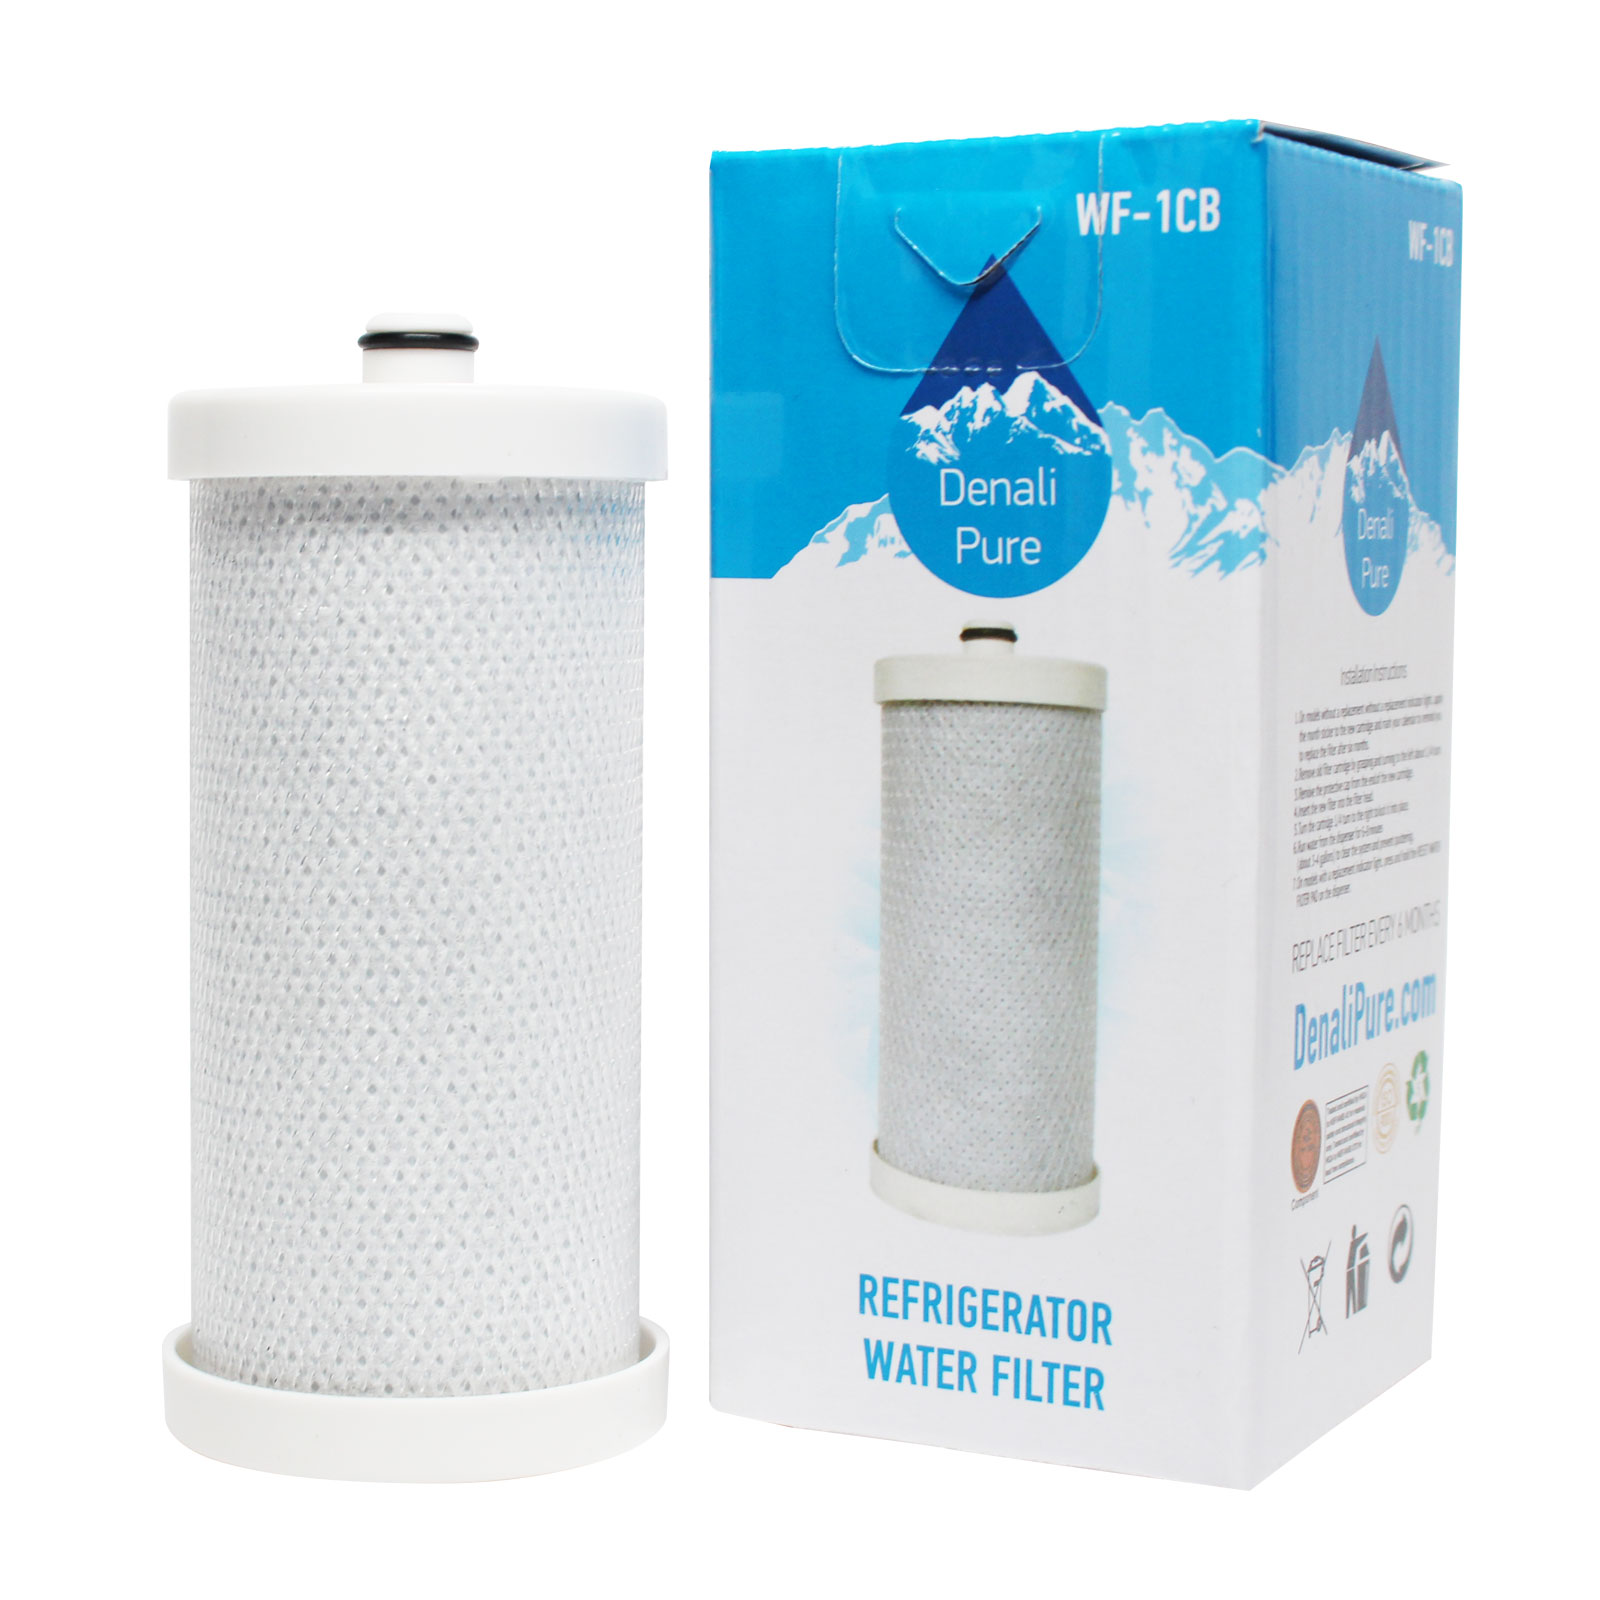 2-Pack Replacement for Frigidaire FRS26R4CW2 Refrigerator Water Filter - Compatible with Frigidaire WF1CB, WFCB Fridge Water Filter Cartridge - Denali Pure Brand - image 2 of 4